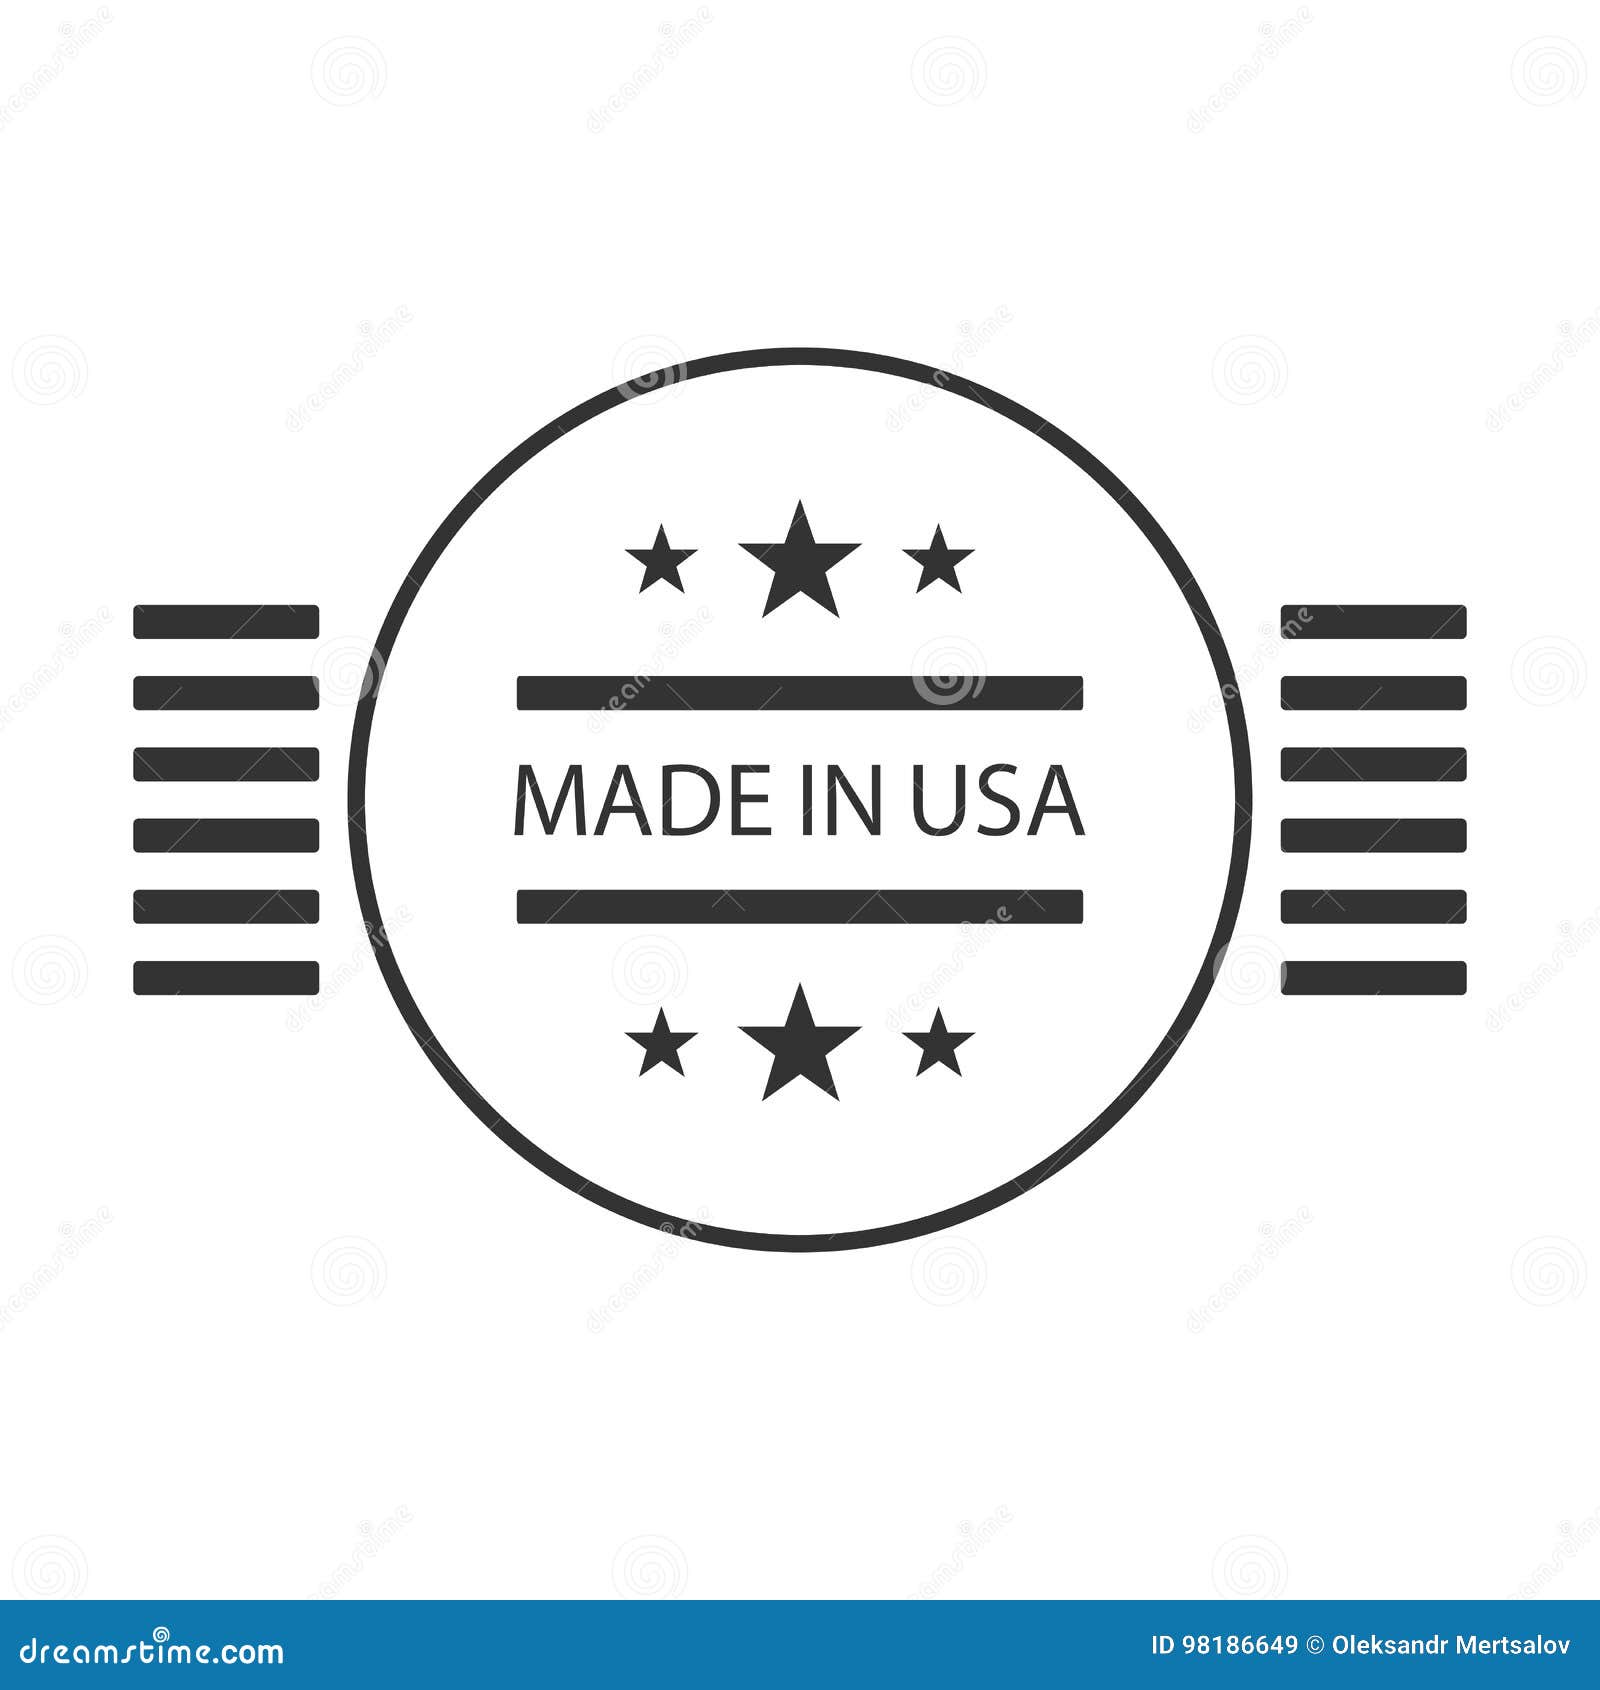  . made in usa